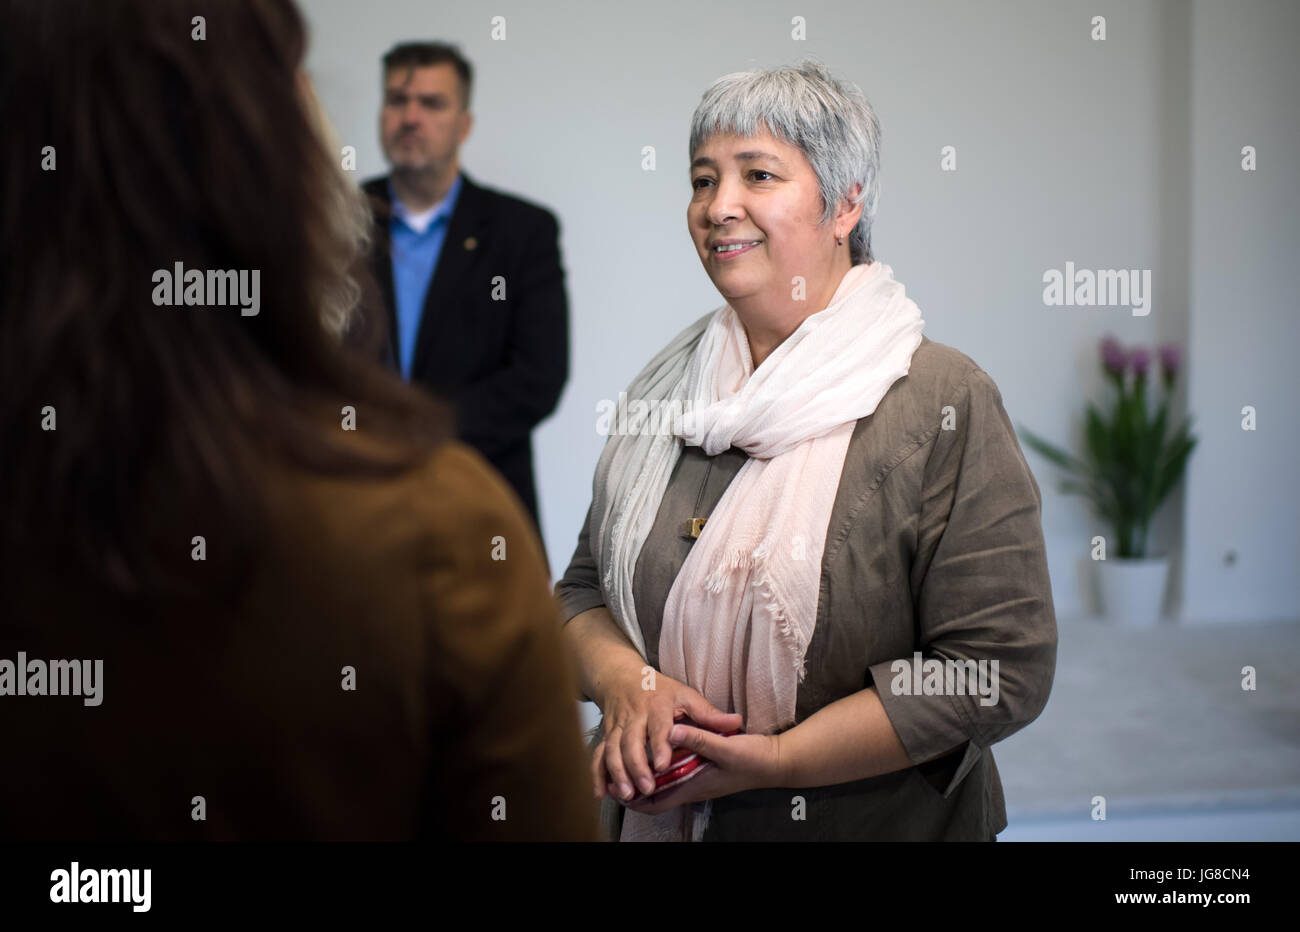 Seyran Ates, co-founder and idea provider of the liberal mosque, speaks to journalists during a visit of Cem Oezdemir, federal chairman of the Buendnis 90/Die Gruenen party, to the Ibn Rushd-Goethe Mosque in Berlin, Germany, 4 July 2017. The mosque founded in June 2017 does not have its own building, instead it uses a room in an attached building of the protestant St. Johannis church in the district of Moabit in Berlin. The new mosque offers a space for joint prayers for men and women as well as Sunnites, Schiites and Alevis. Photo: Bernd von Jutrczenka/dpa Stock Photo